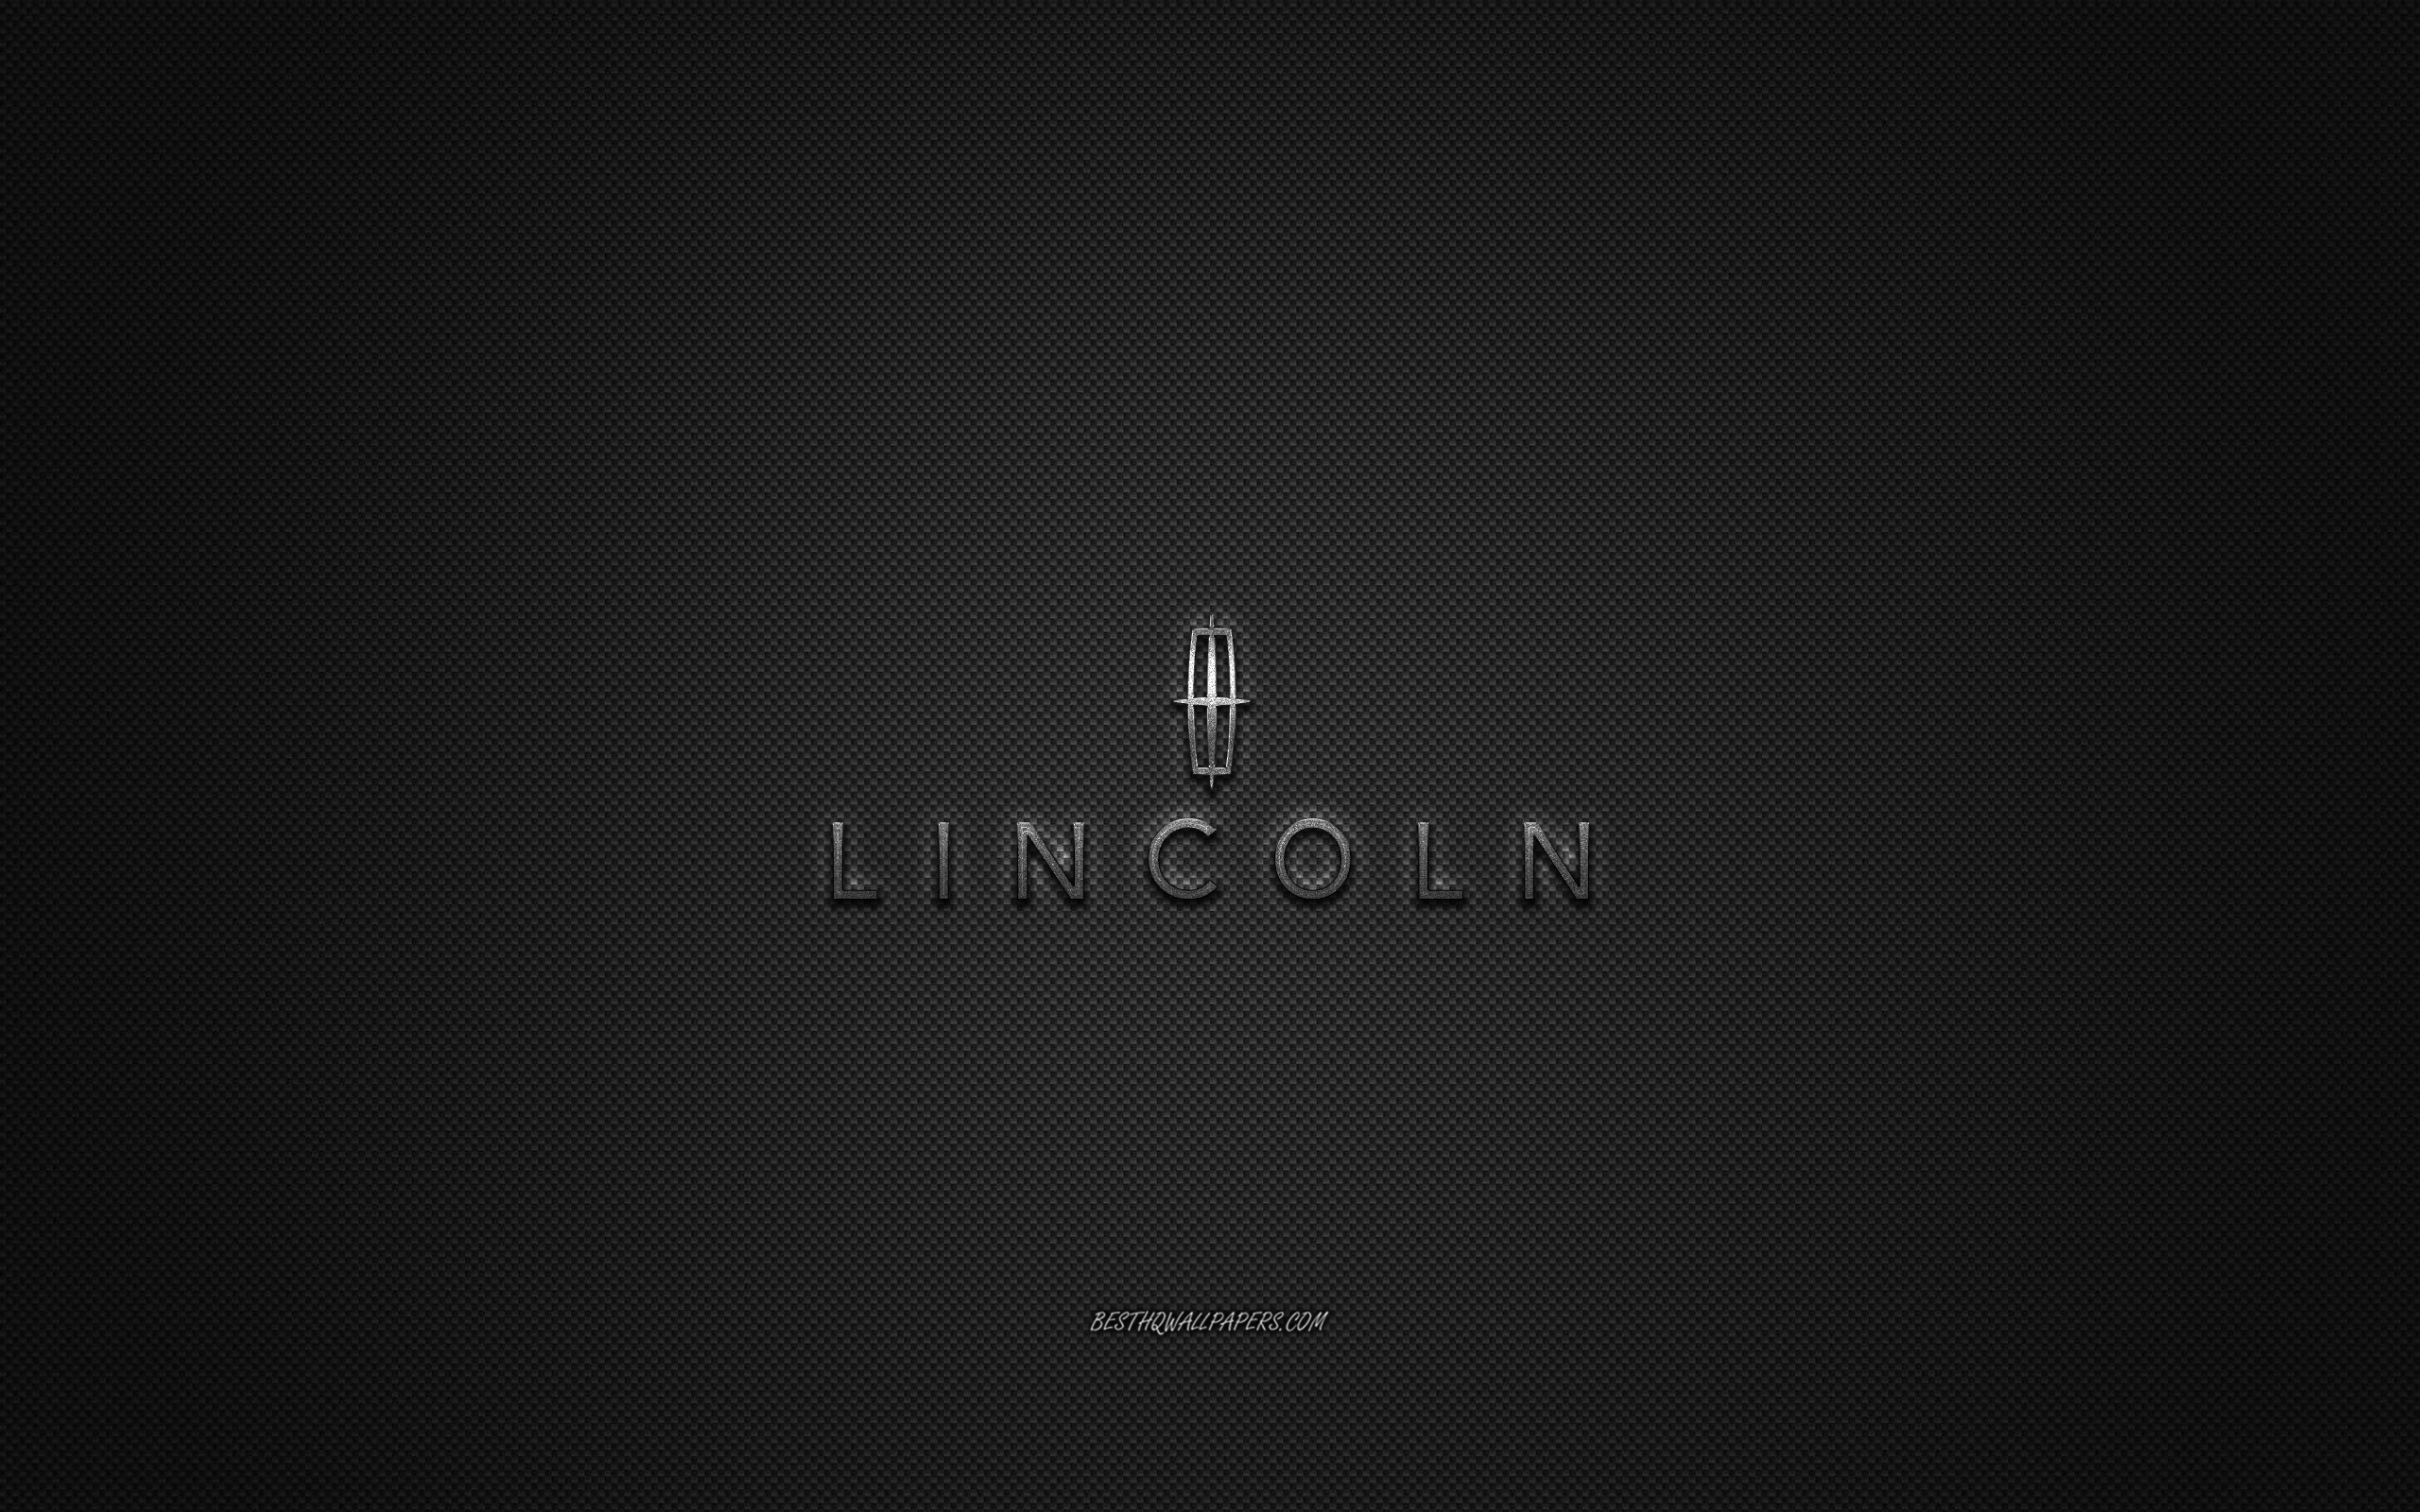 Download wallpaper Lincoln logo, silver logo, gray carbon fiber background, Lincoln metal emblem, Lincoln, cars brands, creative art for desktop with resolution 2560x1600. High Quality HD picture wallpaper